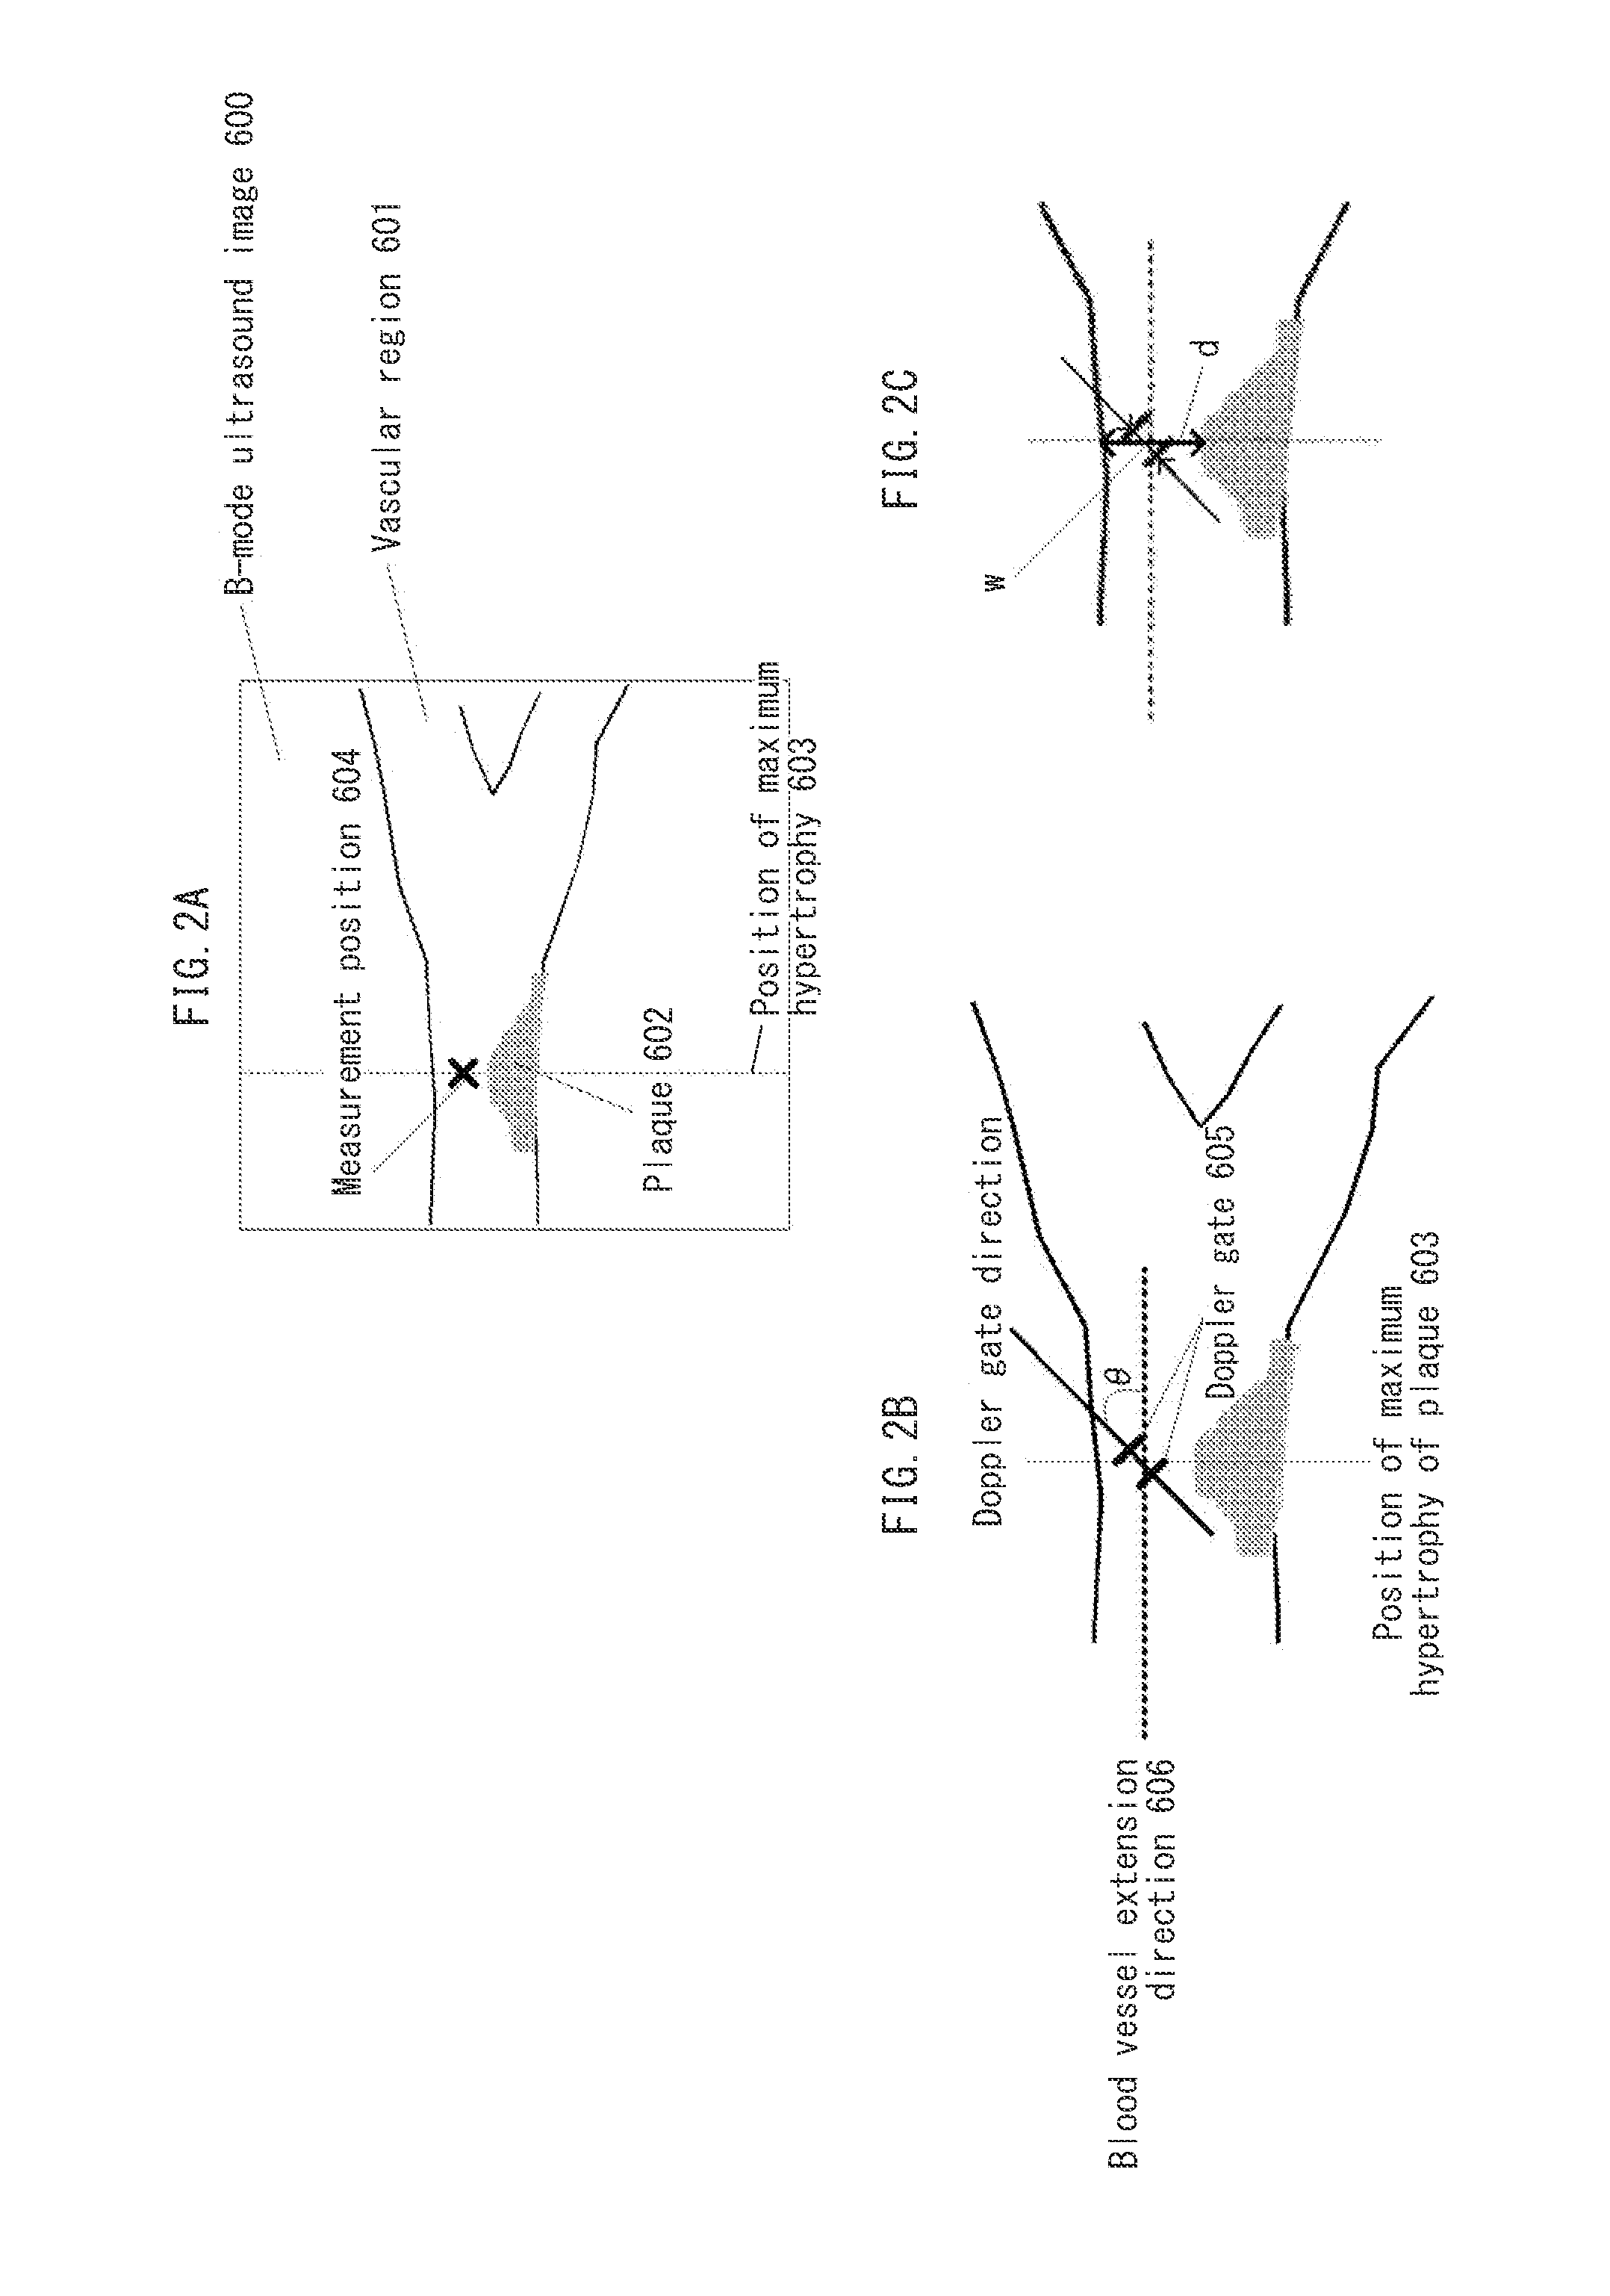 Ultrasound diagnostic apparatus and method for controlling the same